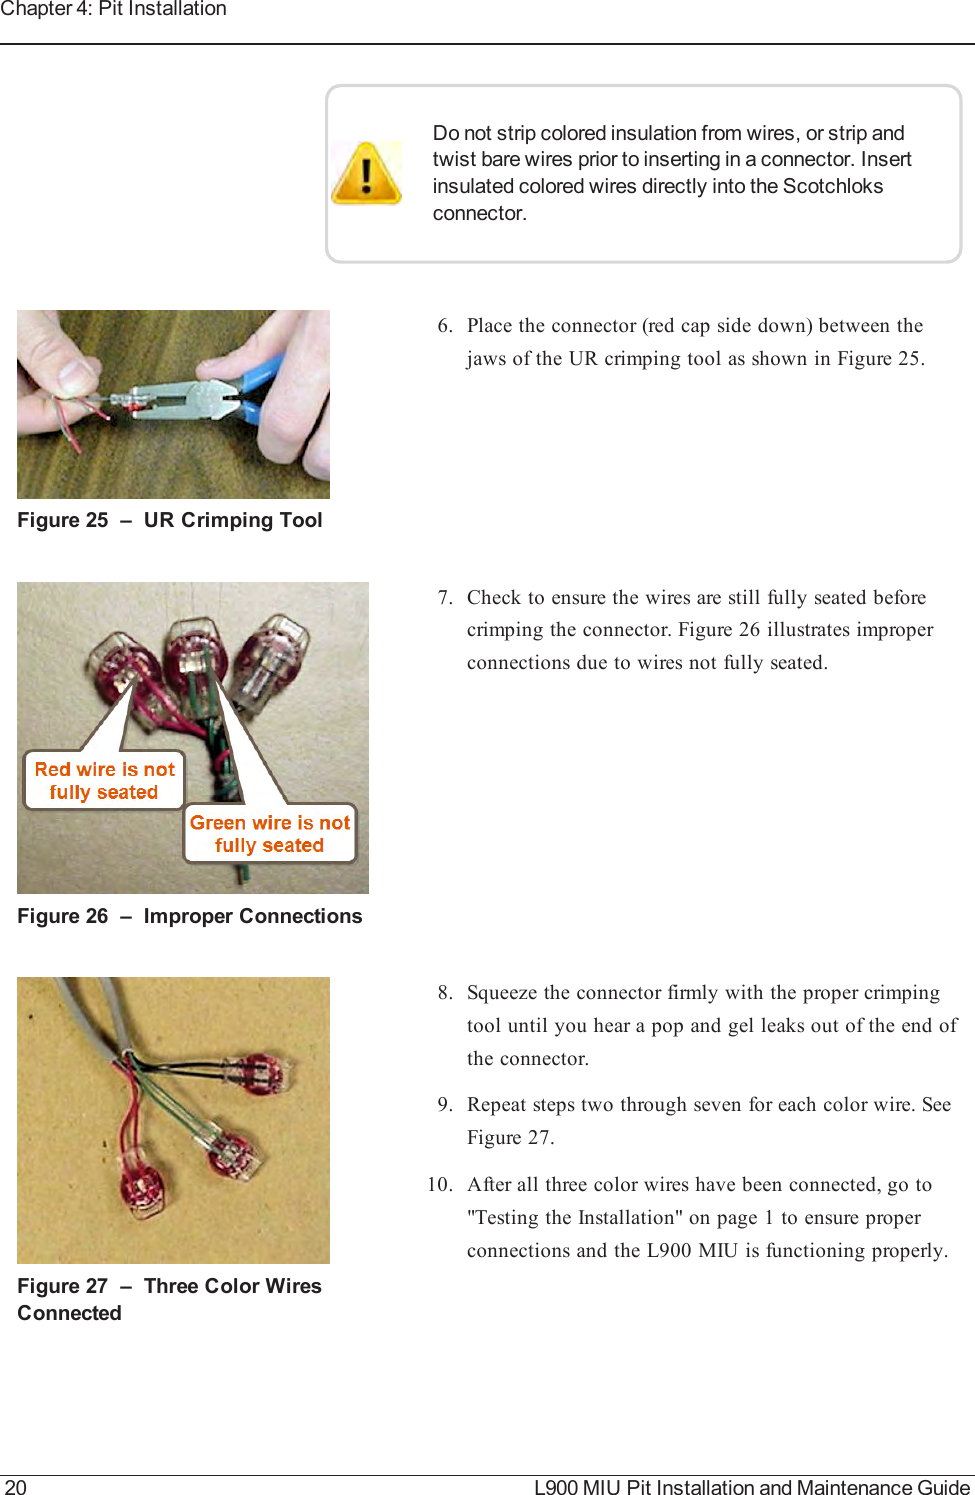 Do not strip colored insulation from wires, or strip andtwist bare wires prior to inserting in a connector. Insertinsulated colored wires directly into the Scotchloksconnector.Figure 25 – URCrimping Tool6. Place the connector (red cap side down) between thejaws of the UR crimping tool as shown in Figure 25.Figure 26 – Improper Connections7. Check to ensure the wires are still fully seated beforecrimping the connector. Figure 26 illustrates improperconnections due to wires not fully seated.Figure 27 – Three Color WiresConnected8. Squeeze the connector firmly with the proper crimpingtool until you hear a pop and gel leaks out of the end ofthe connector.9. Repeat steps two through seven for each color wire. SeeFigure 27.10. After all three color wires have been connected, go to&quot;Testing the Installation&quot; on page1 to ensure properconnections and the L900 MIU is functioning properly.20 L900 MIU Pit Installation and Maintenance GuideChapter 4: Pit Installation